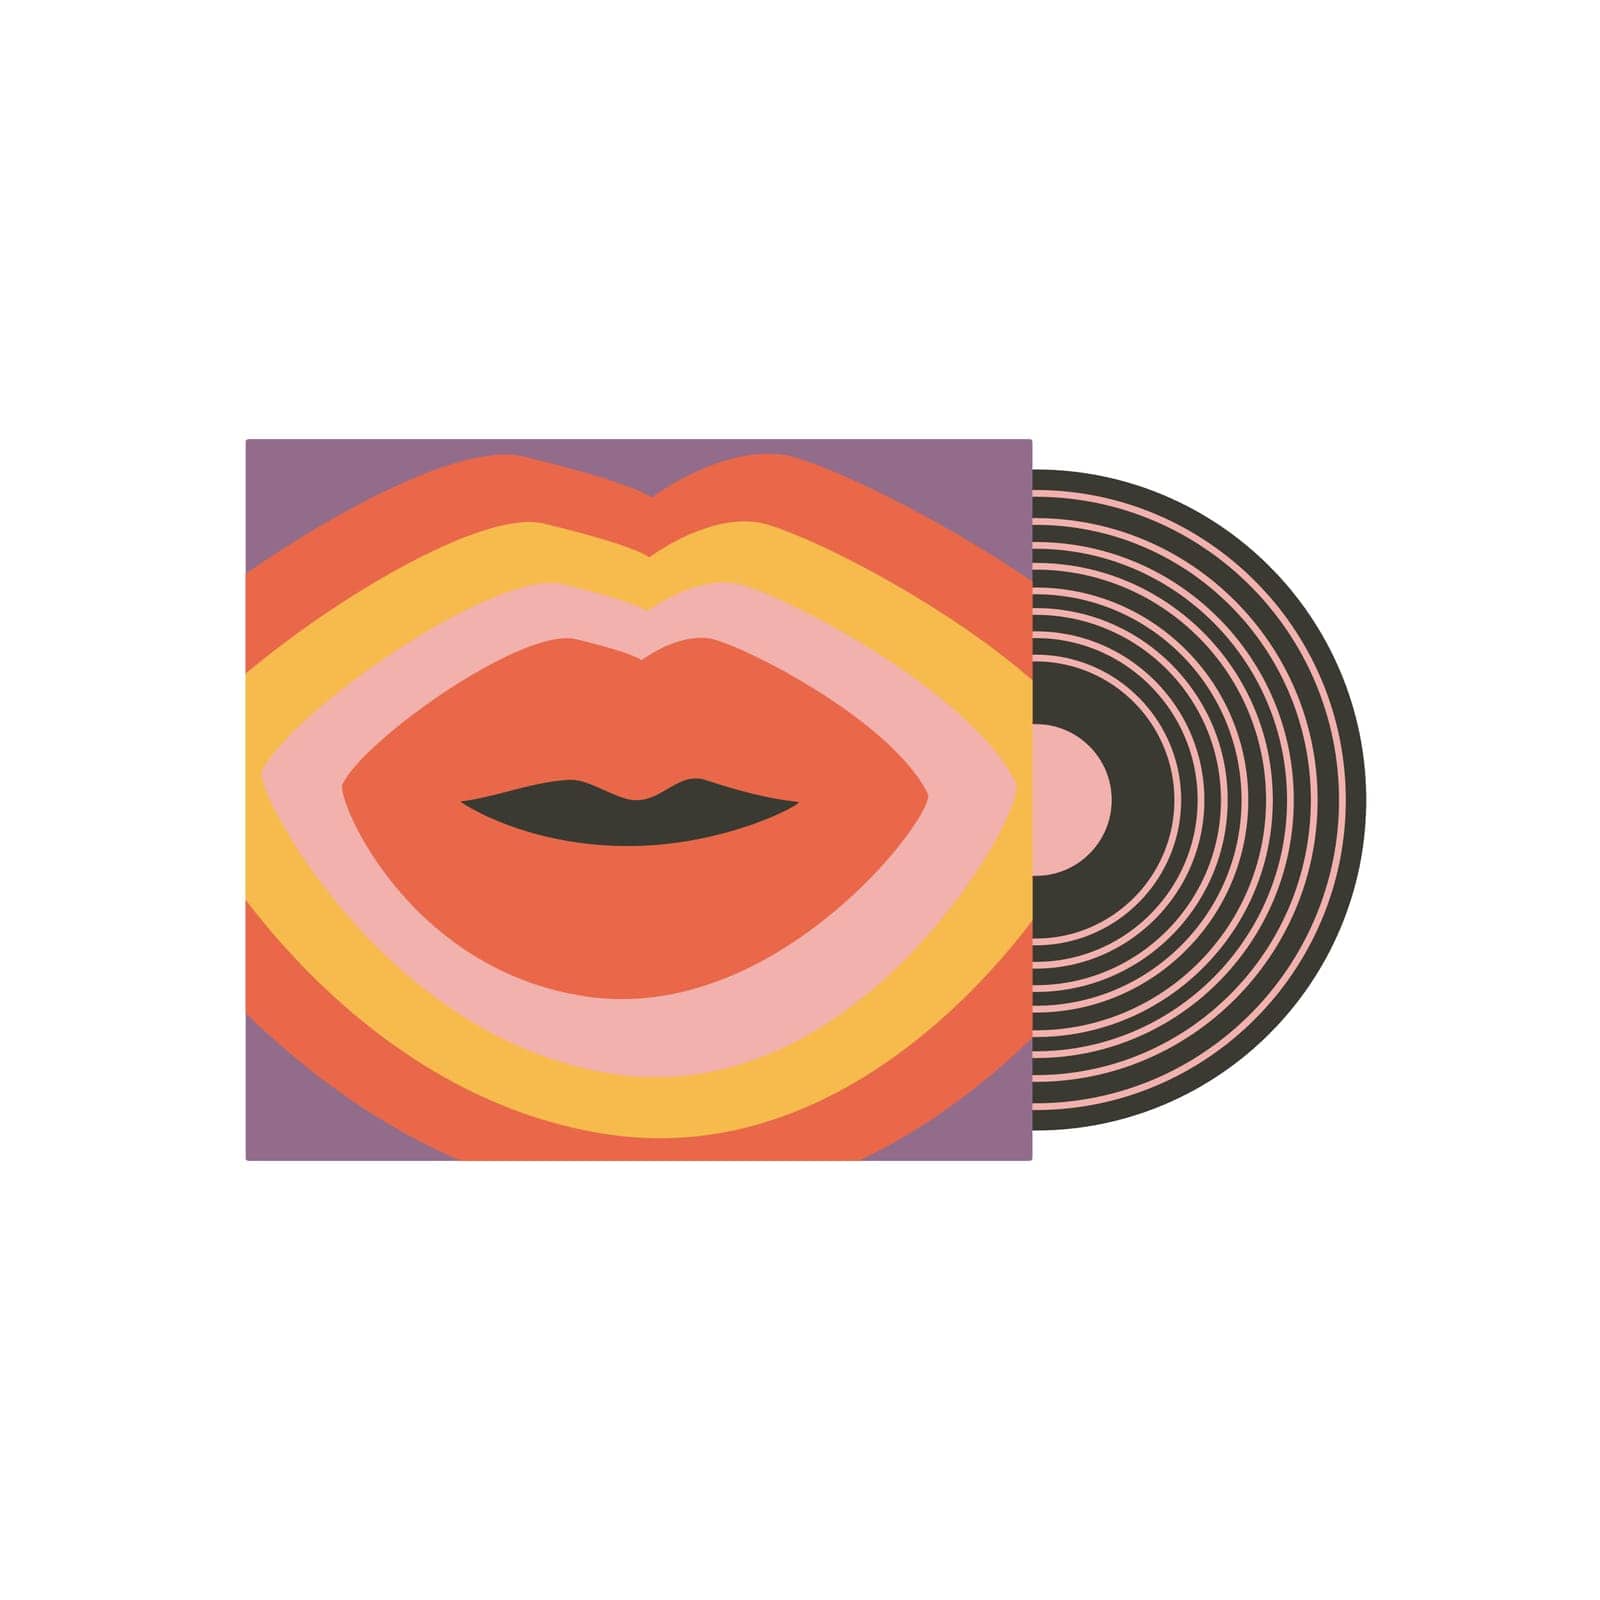 Retro Vinyl Record packed with lips. Vintage Nostalgic 70s-90s vibes by ircydraw